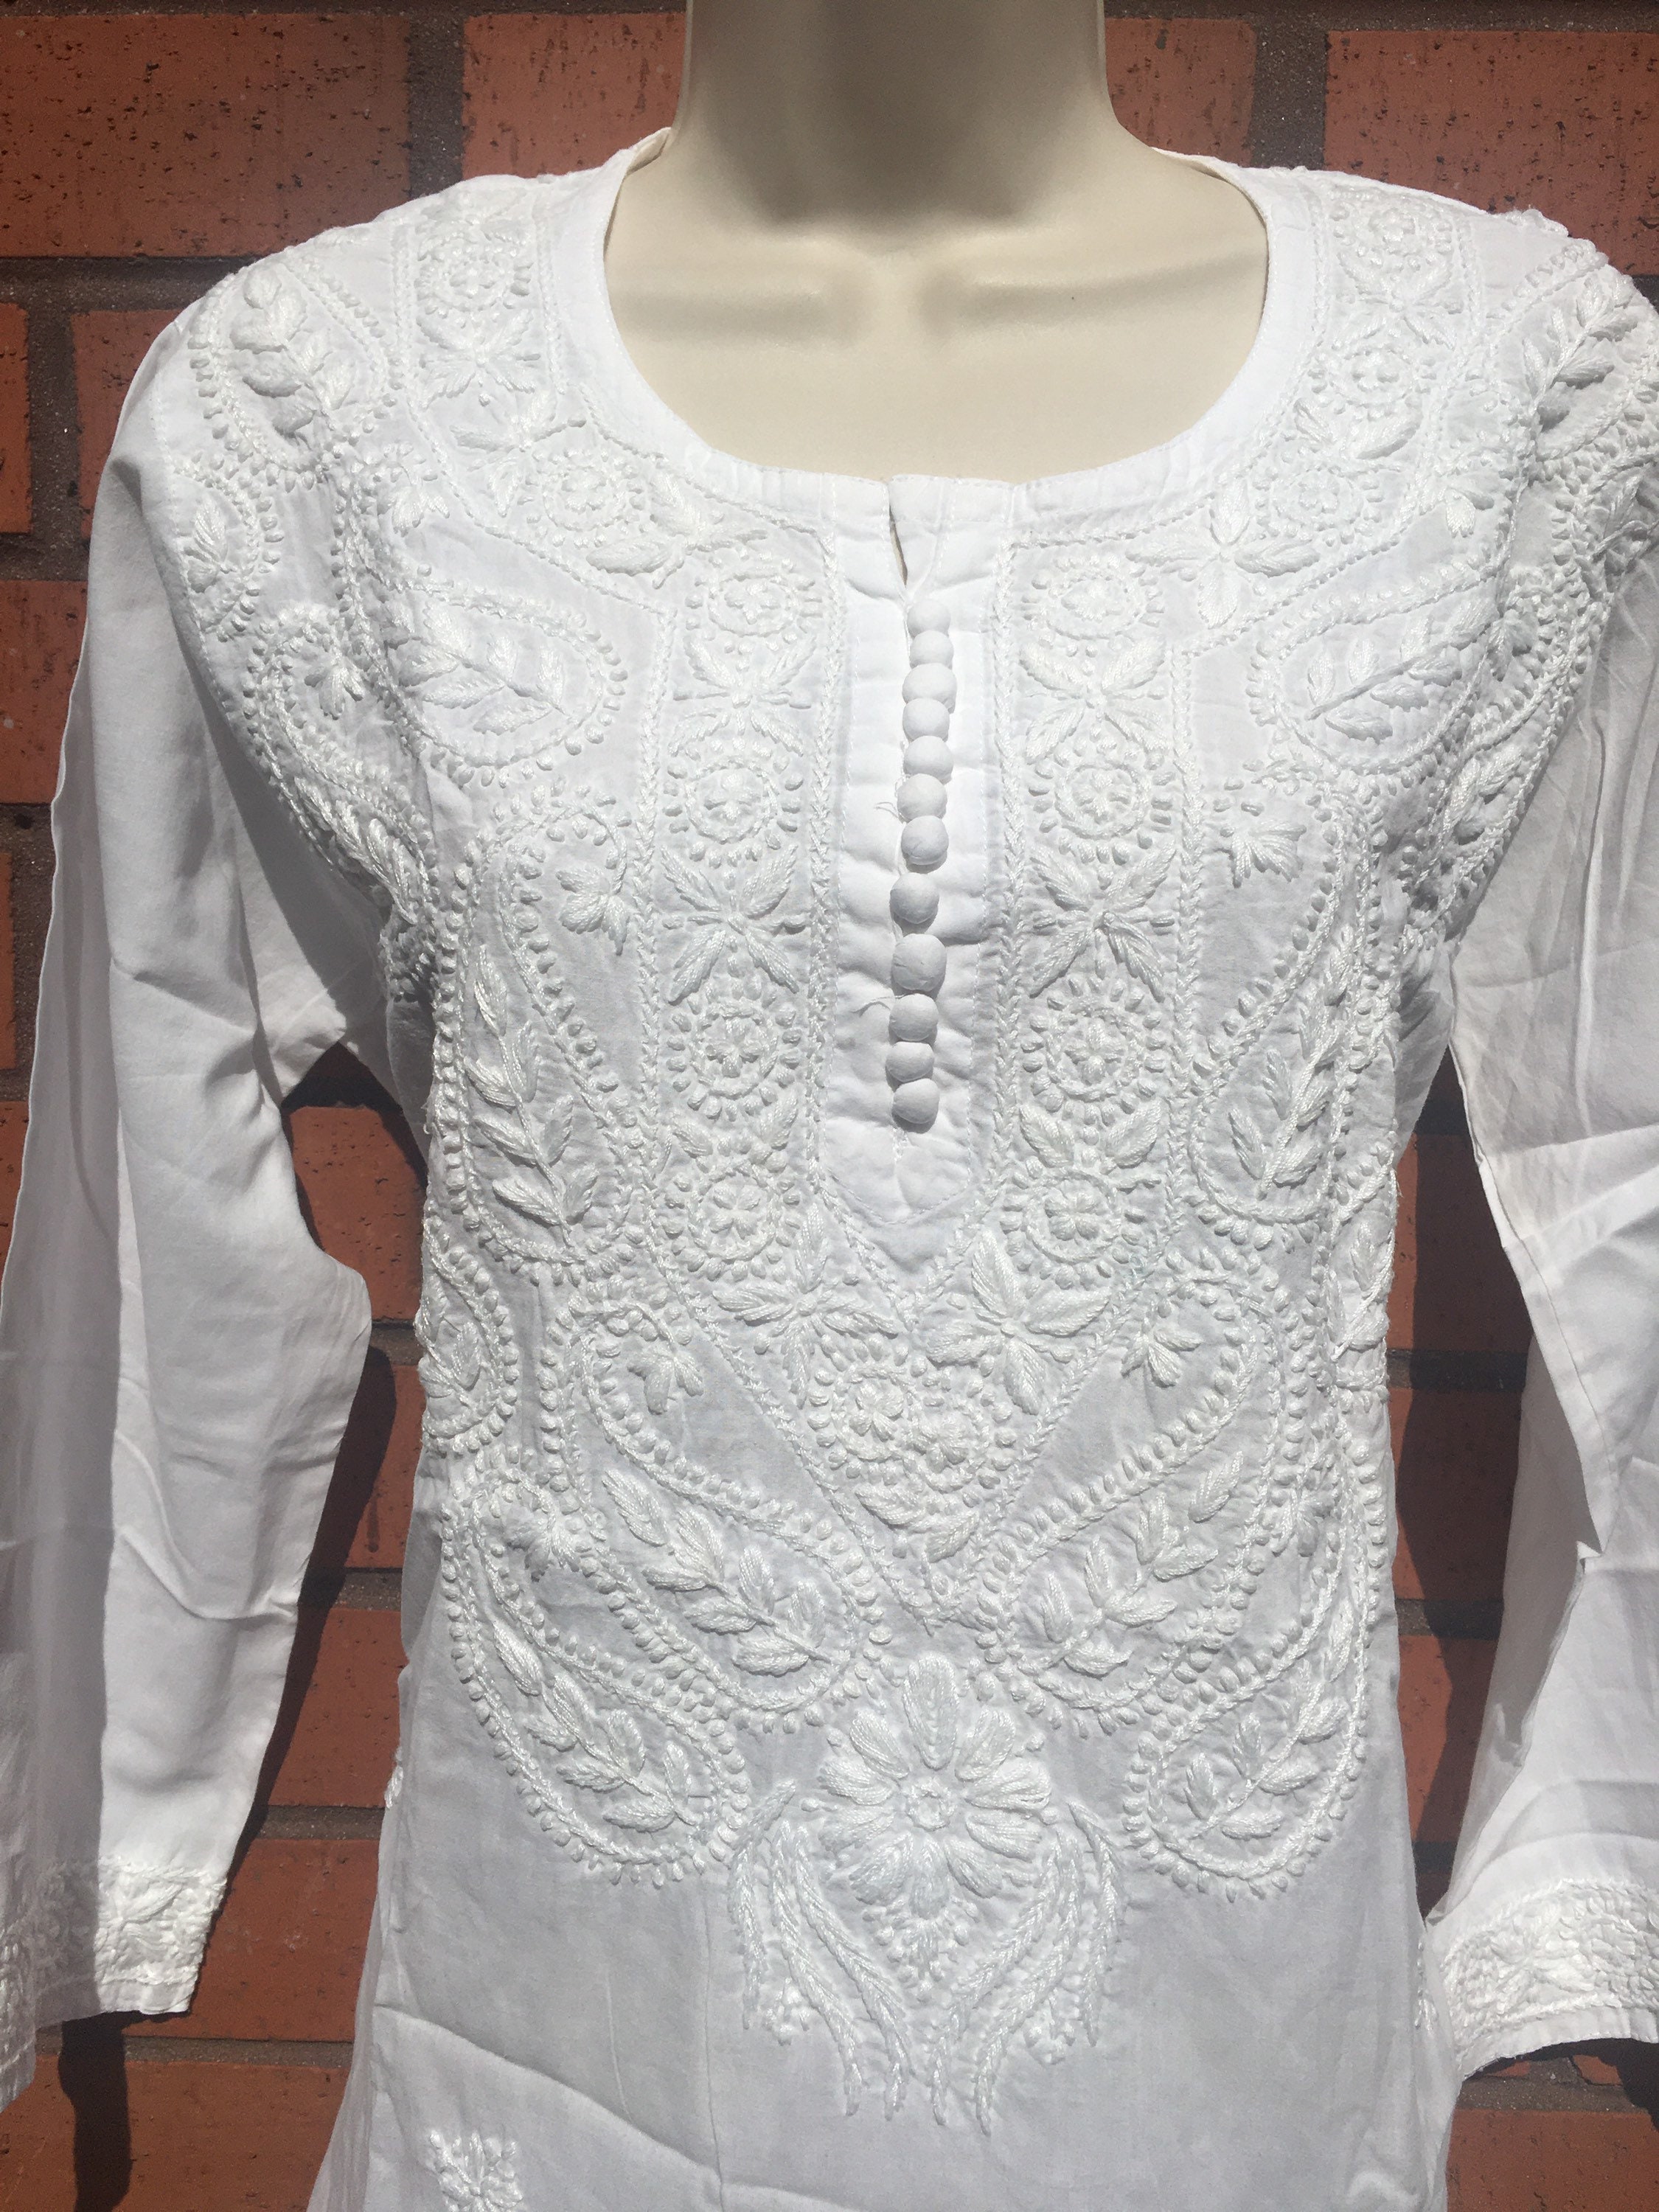 Bust 36 inch Holiday White cotton long sleeve embroidered | Etsy